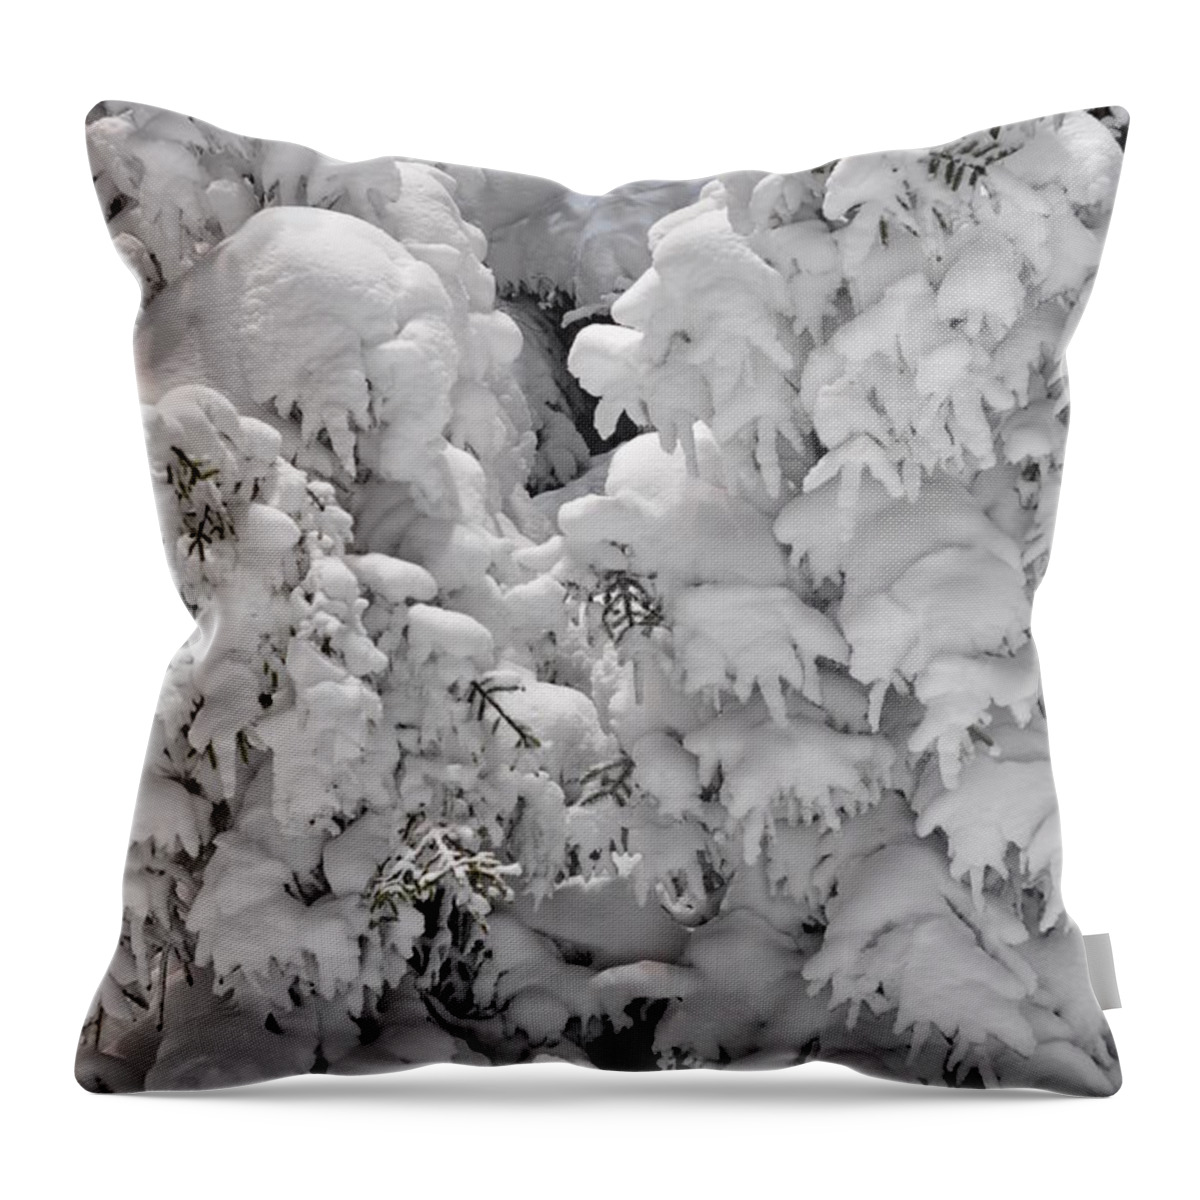 Snow Throw Pillow featuring the photograph Snow Coat by Alex Grichenko